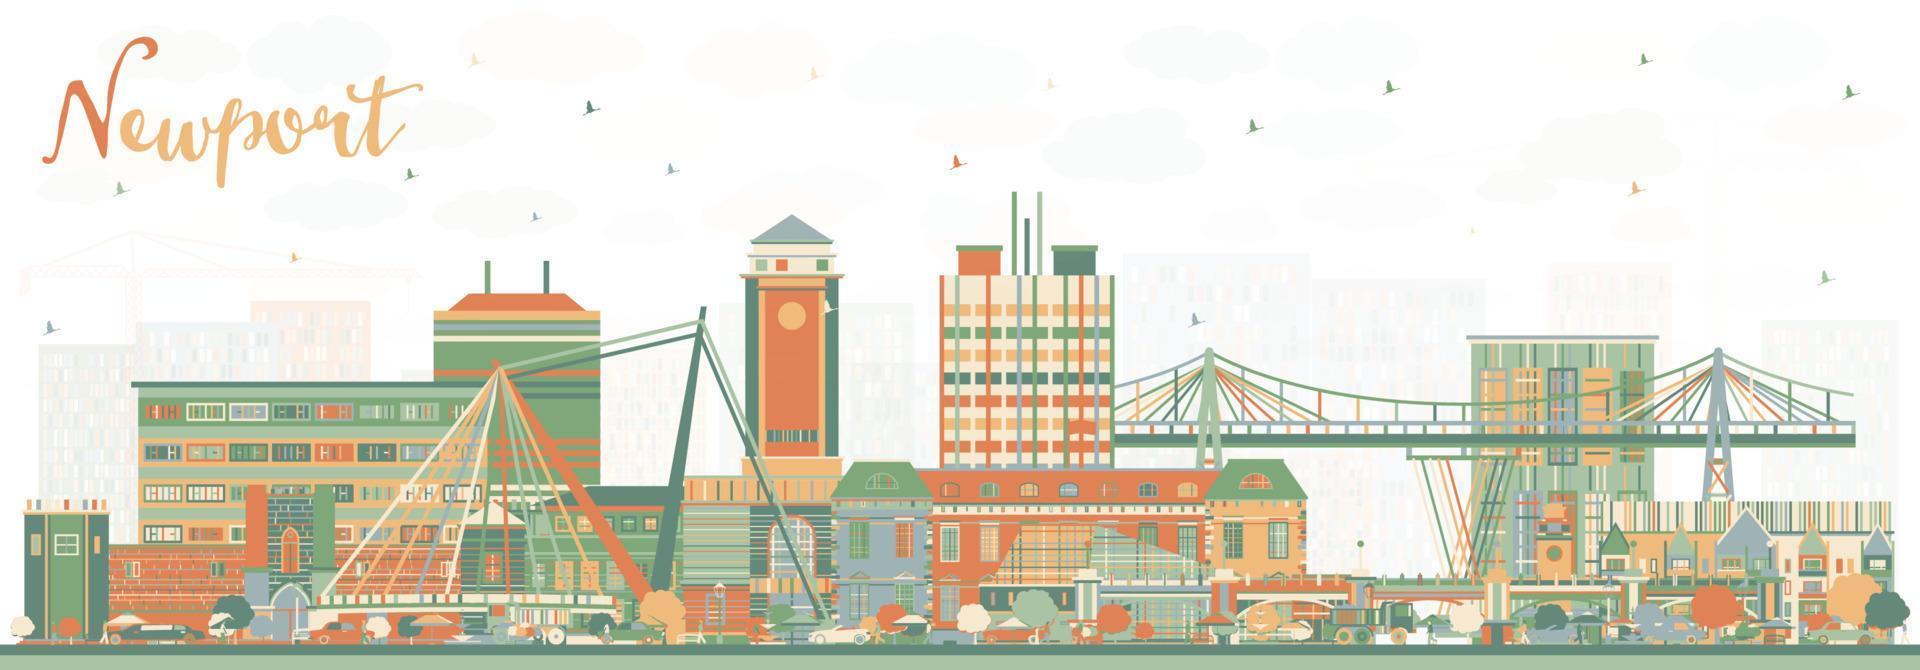 Newport Wales City Skyline with Color Buildings. vector